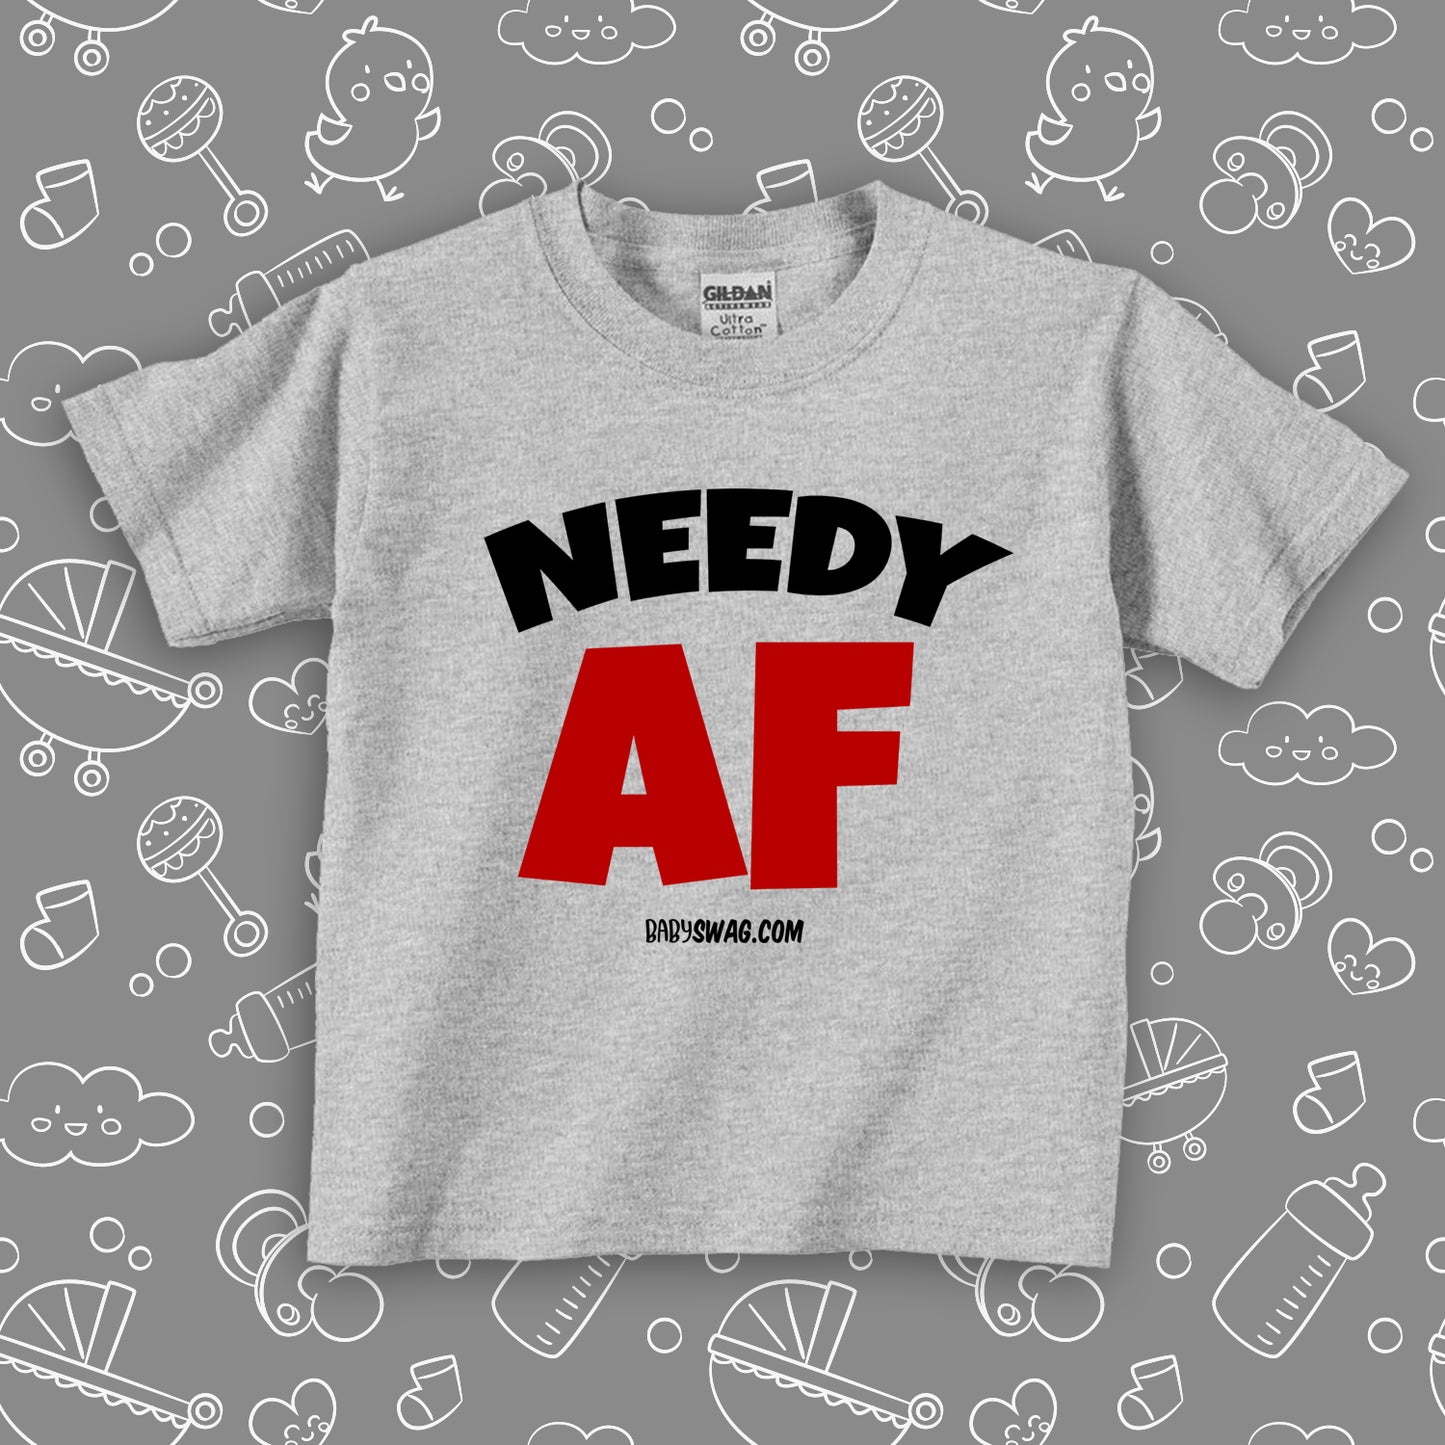 The "Needy AF" funny toddler tee in grey. 